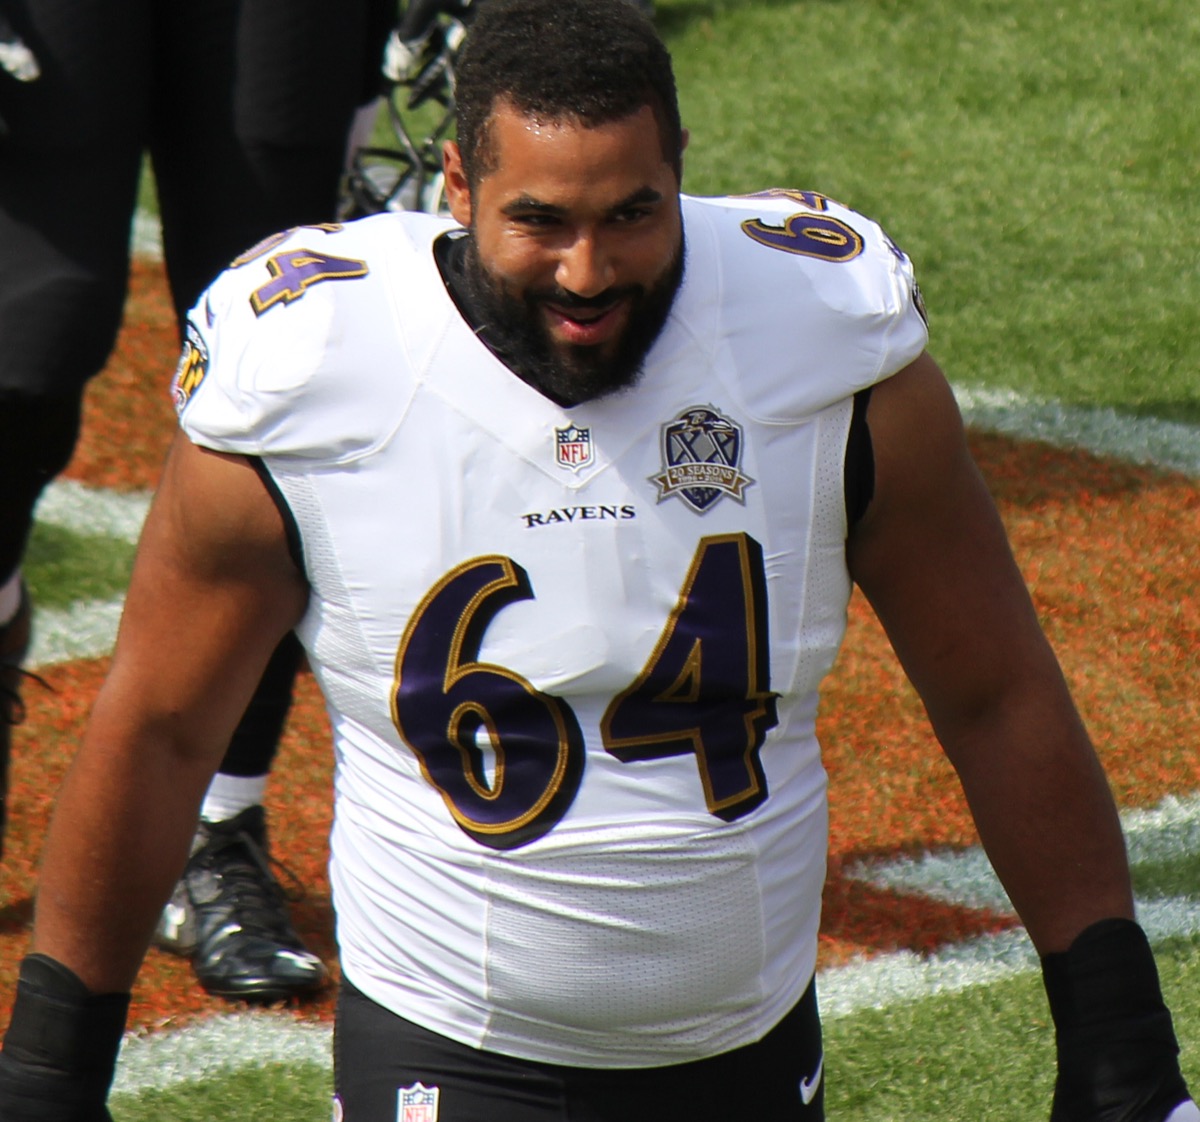 large football player in ravens jersey with number 64 smiling and walking toward camera on black background